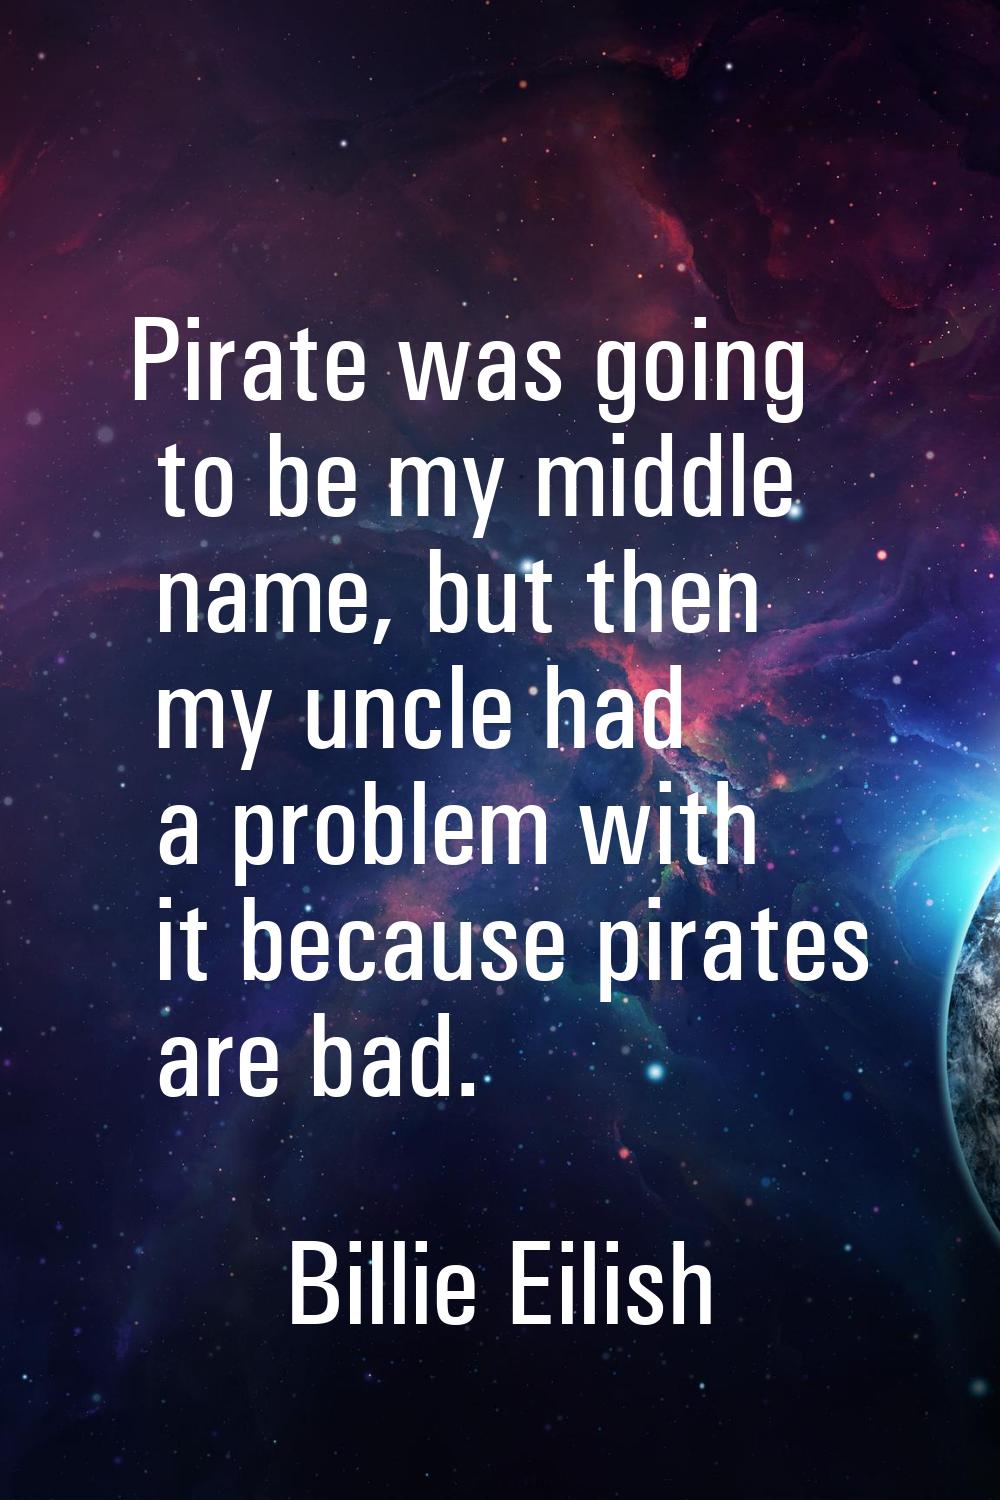 Pirate was going to be my middle name, but then my uncle had a problem with it because pirates are 